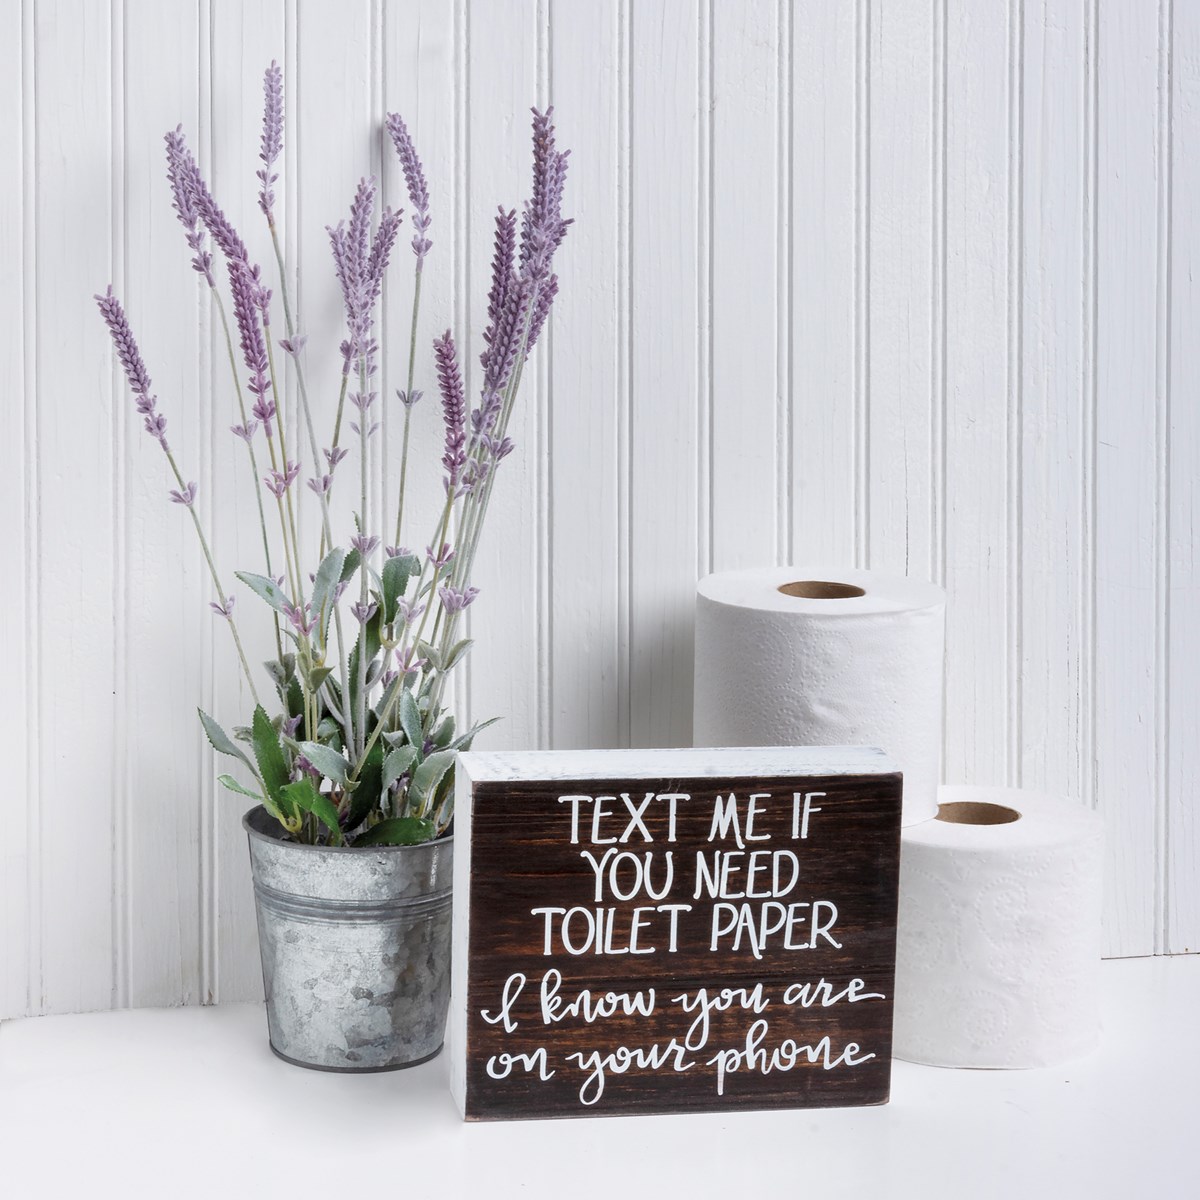 Box Sign - I Know You Are On Your Phone - 7.50" x 6" x 1.75" - Wood